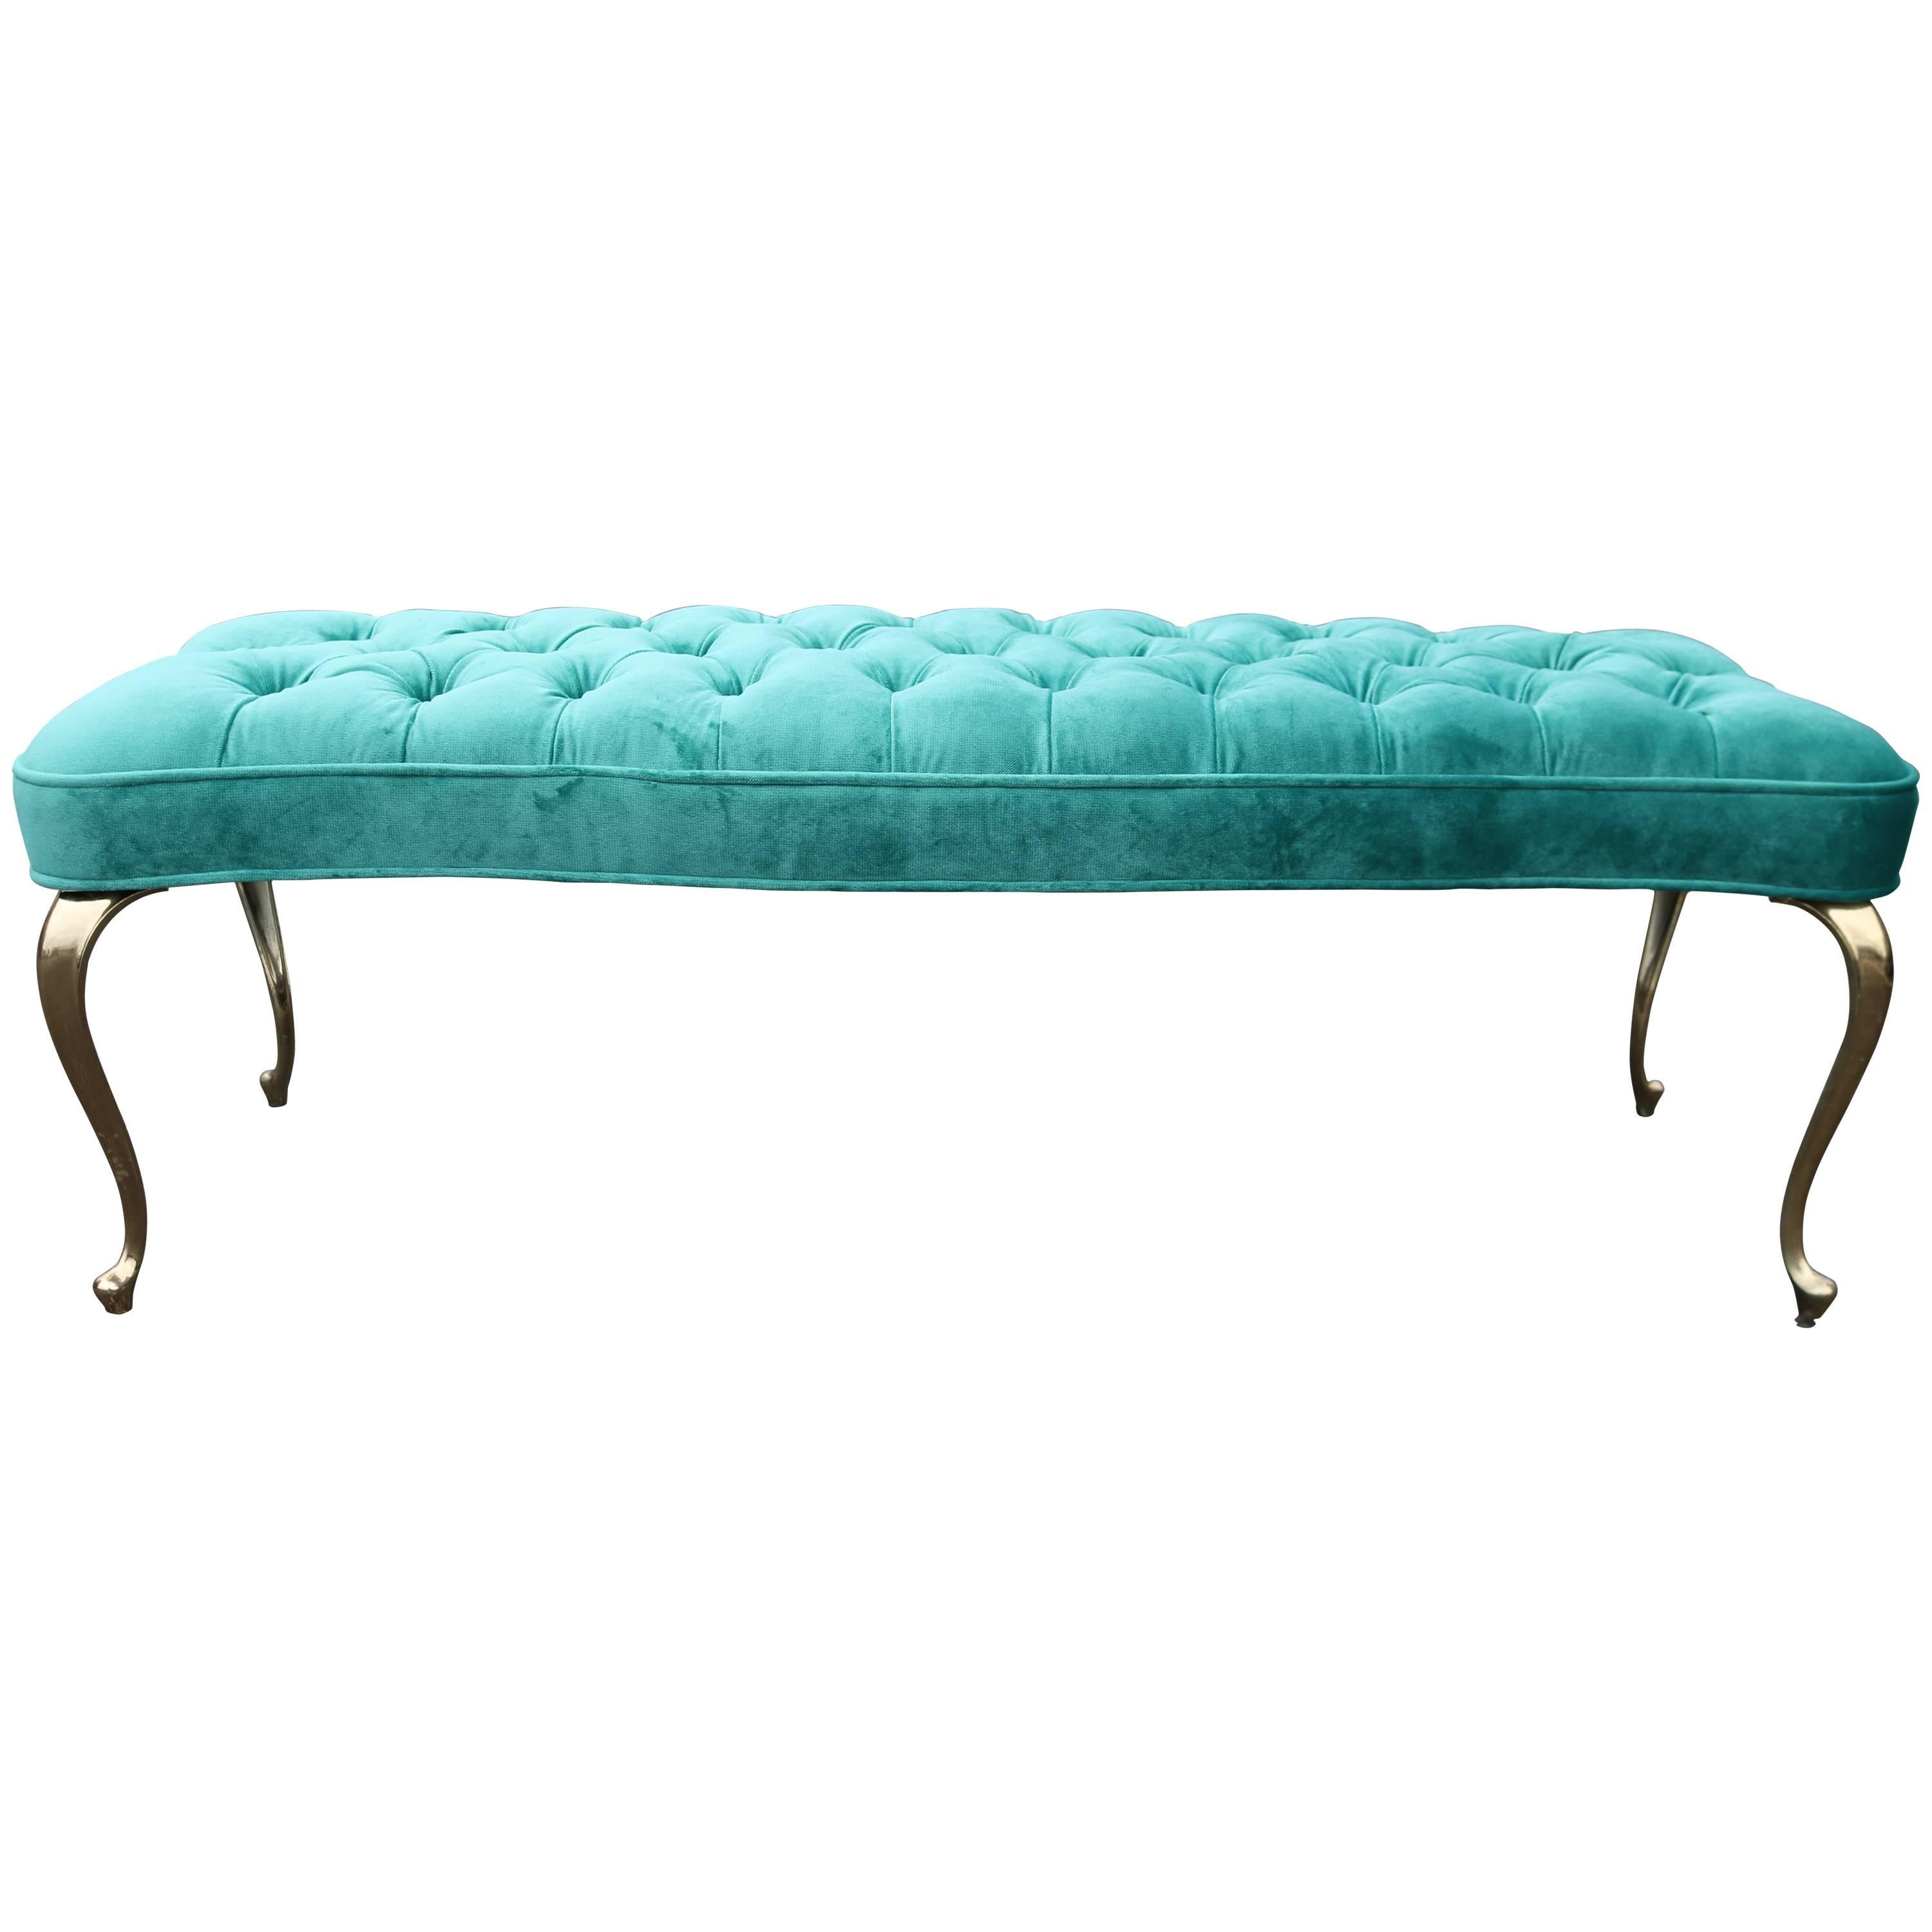 Tufted Aqua Velvet Ottoman Bench with Curved Brass Legs